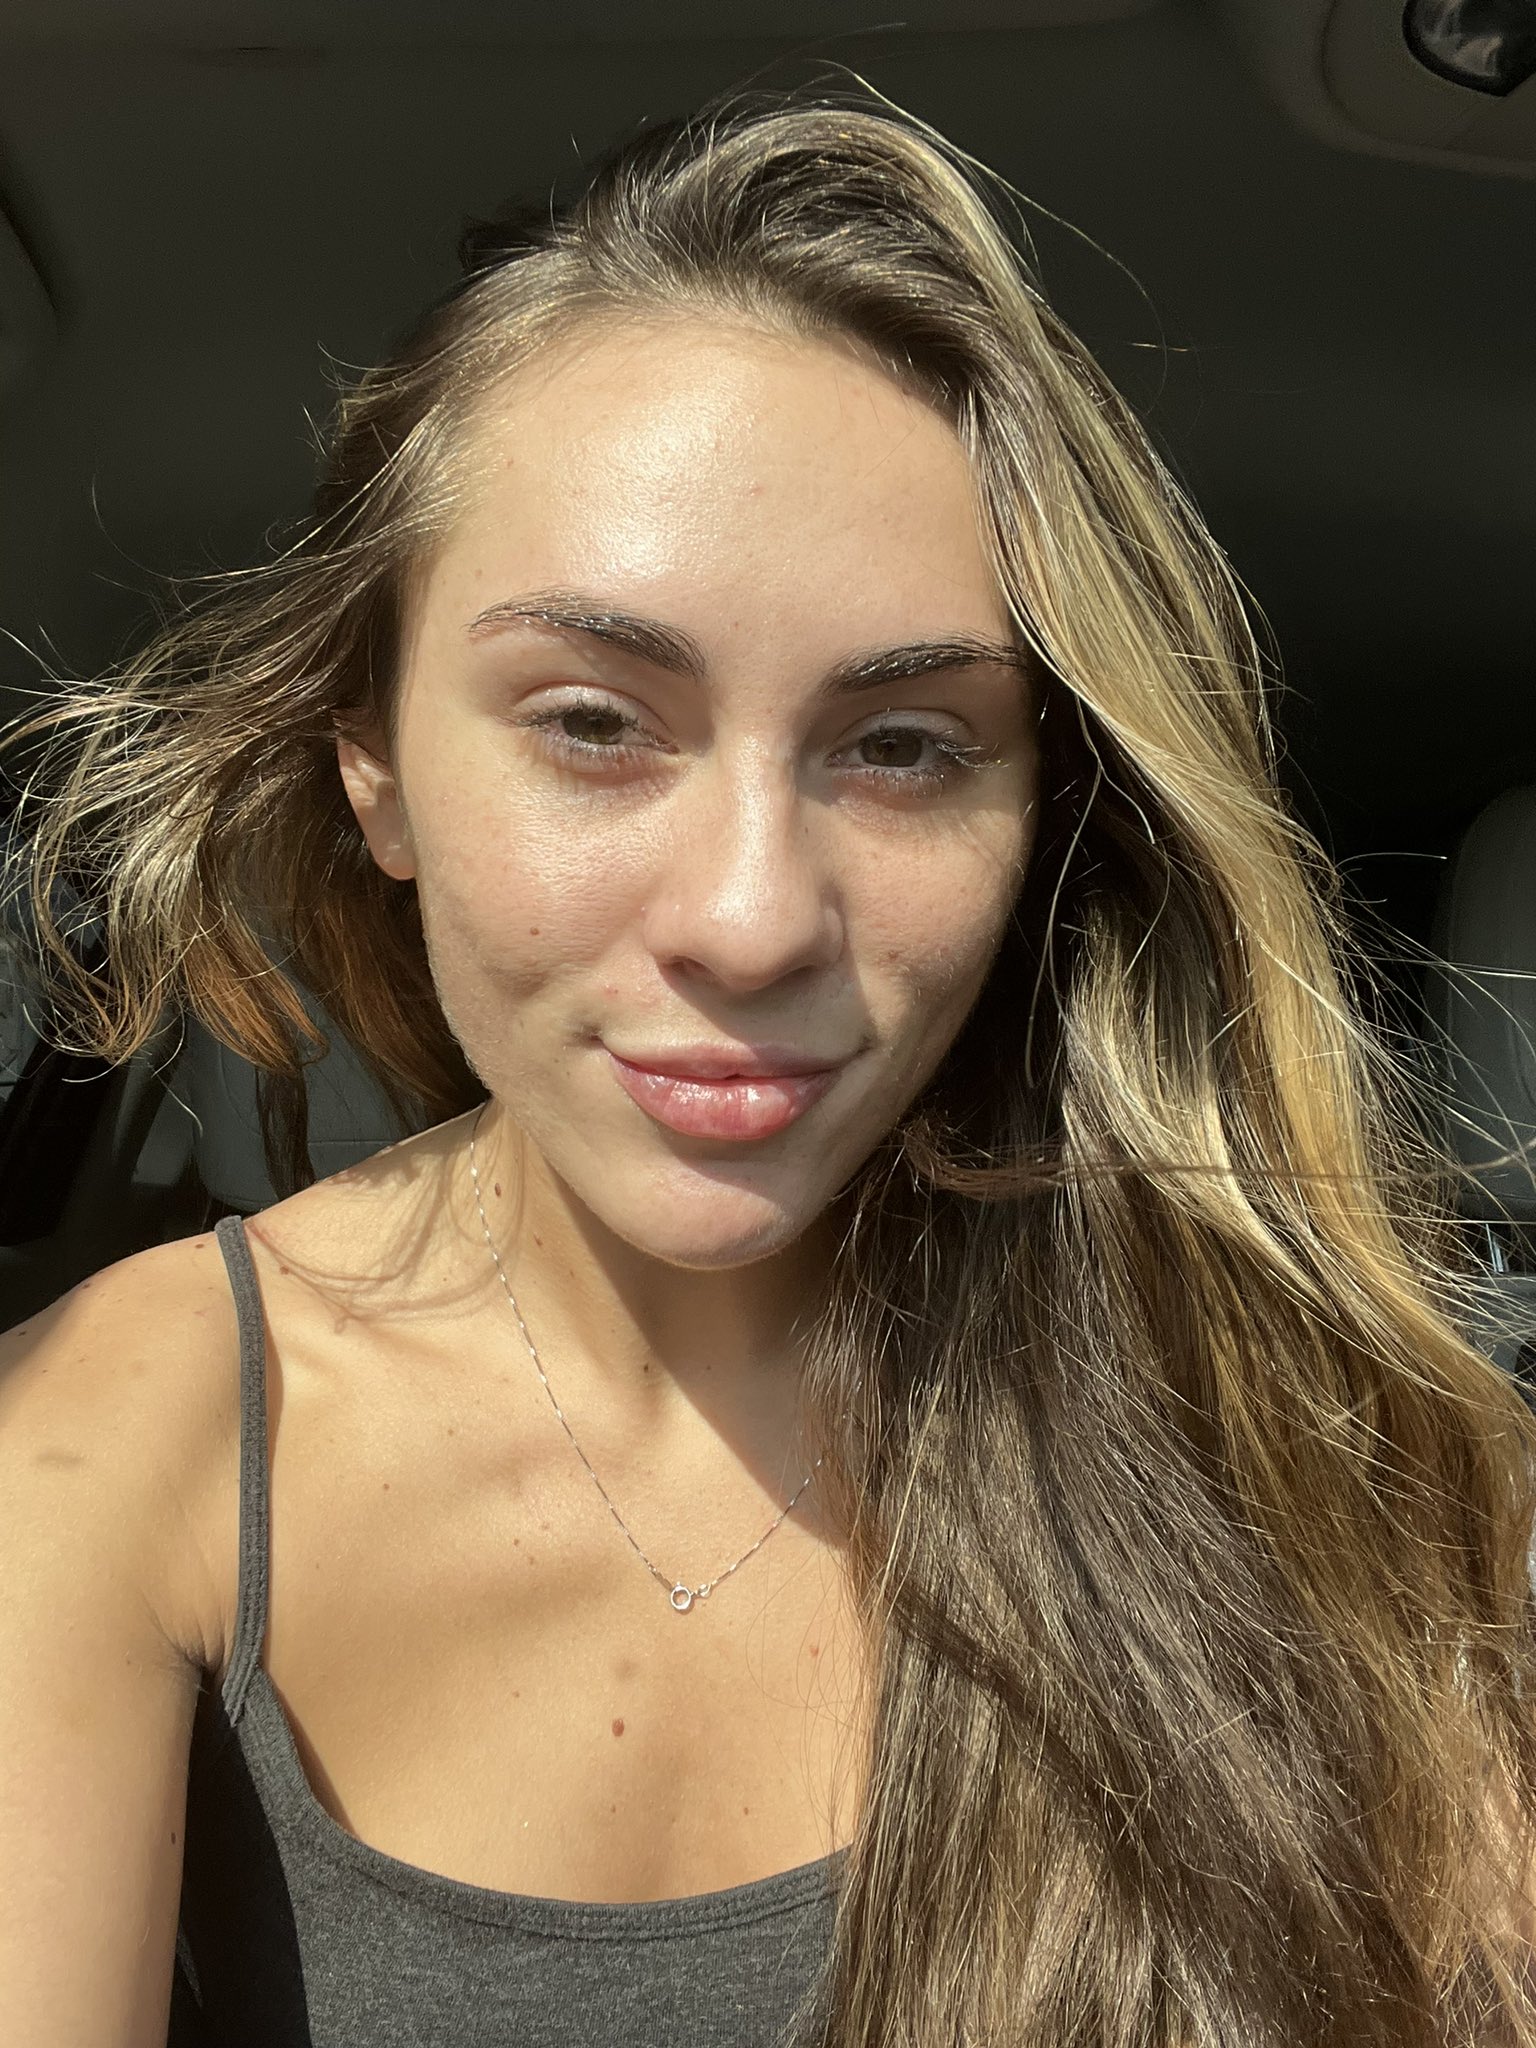 Tw Pornstars 3 Pic Mackenzie Mace Twitter When You Find Skincare That Works For You 9